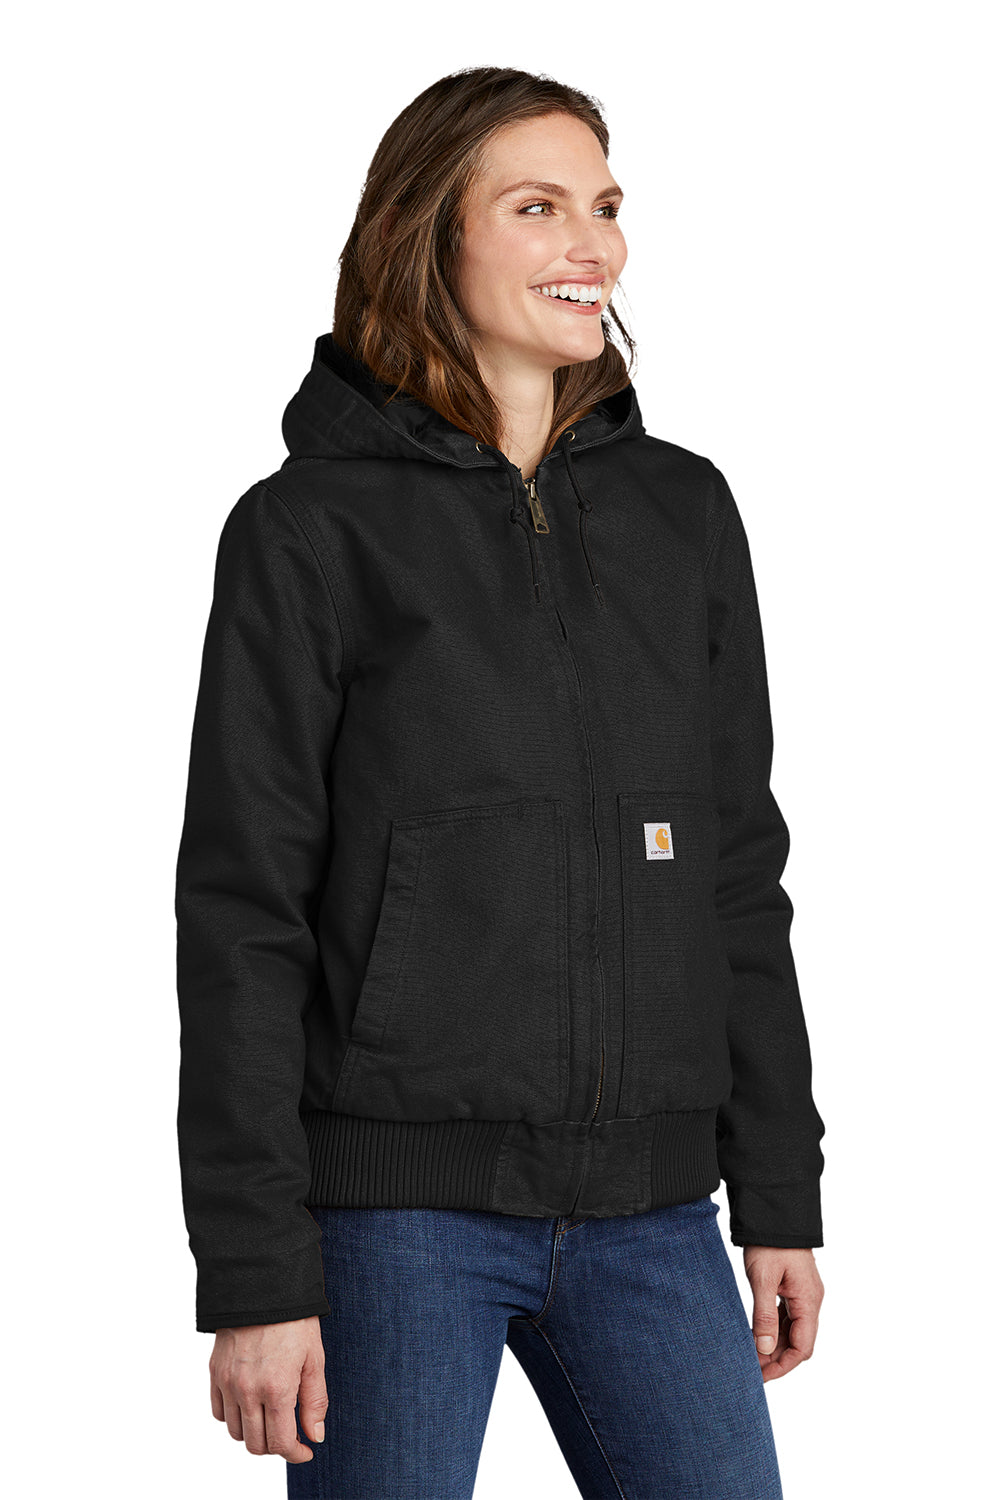 Carhartt CT104053 Womens Active Washed Duck Full Zip Hooded Jacket Black Model 3Q